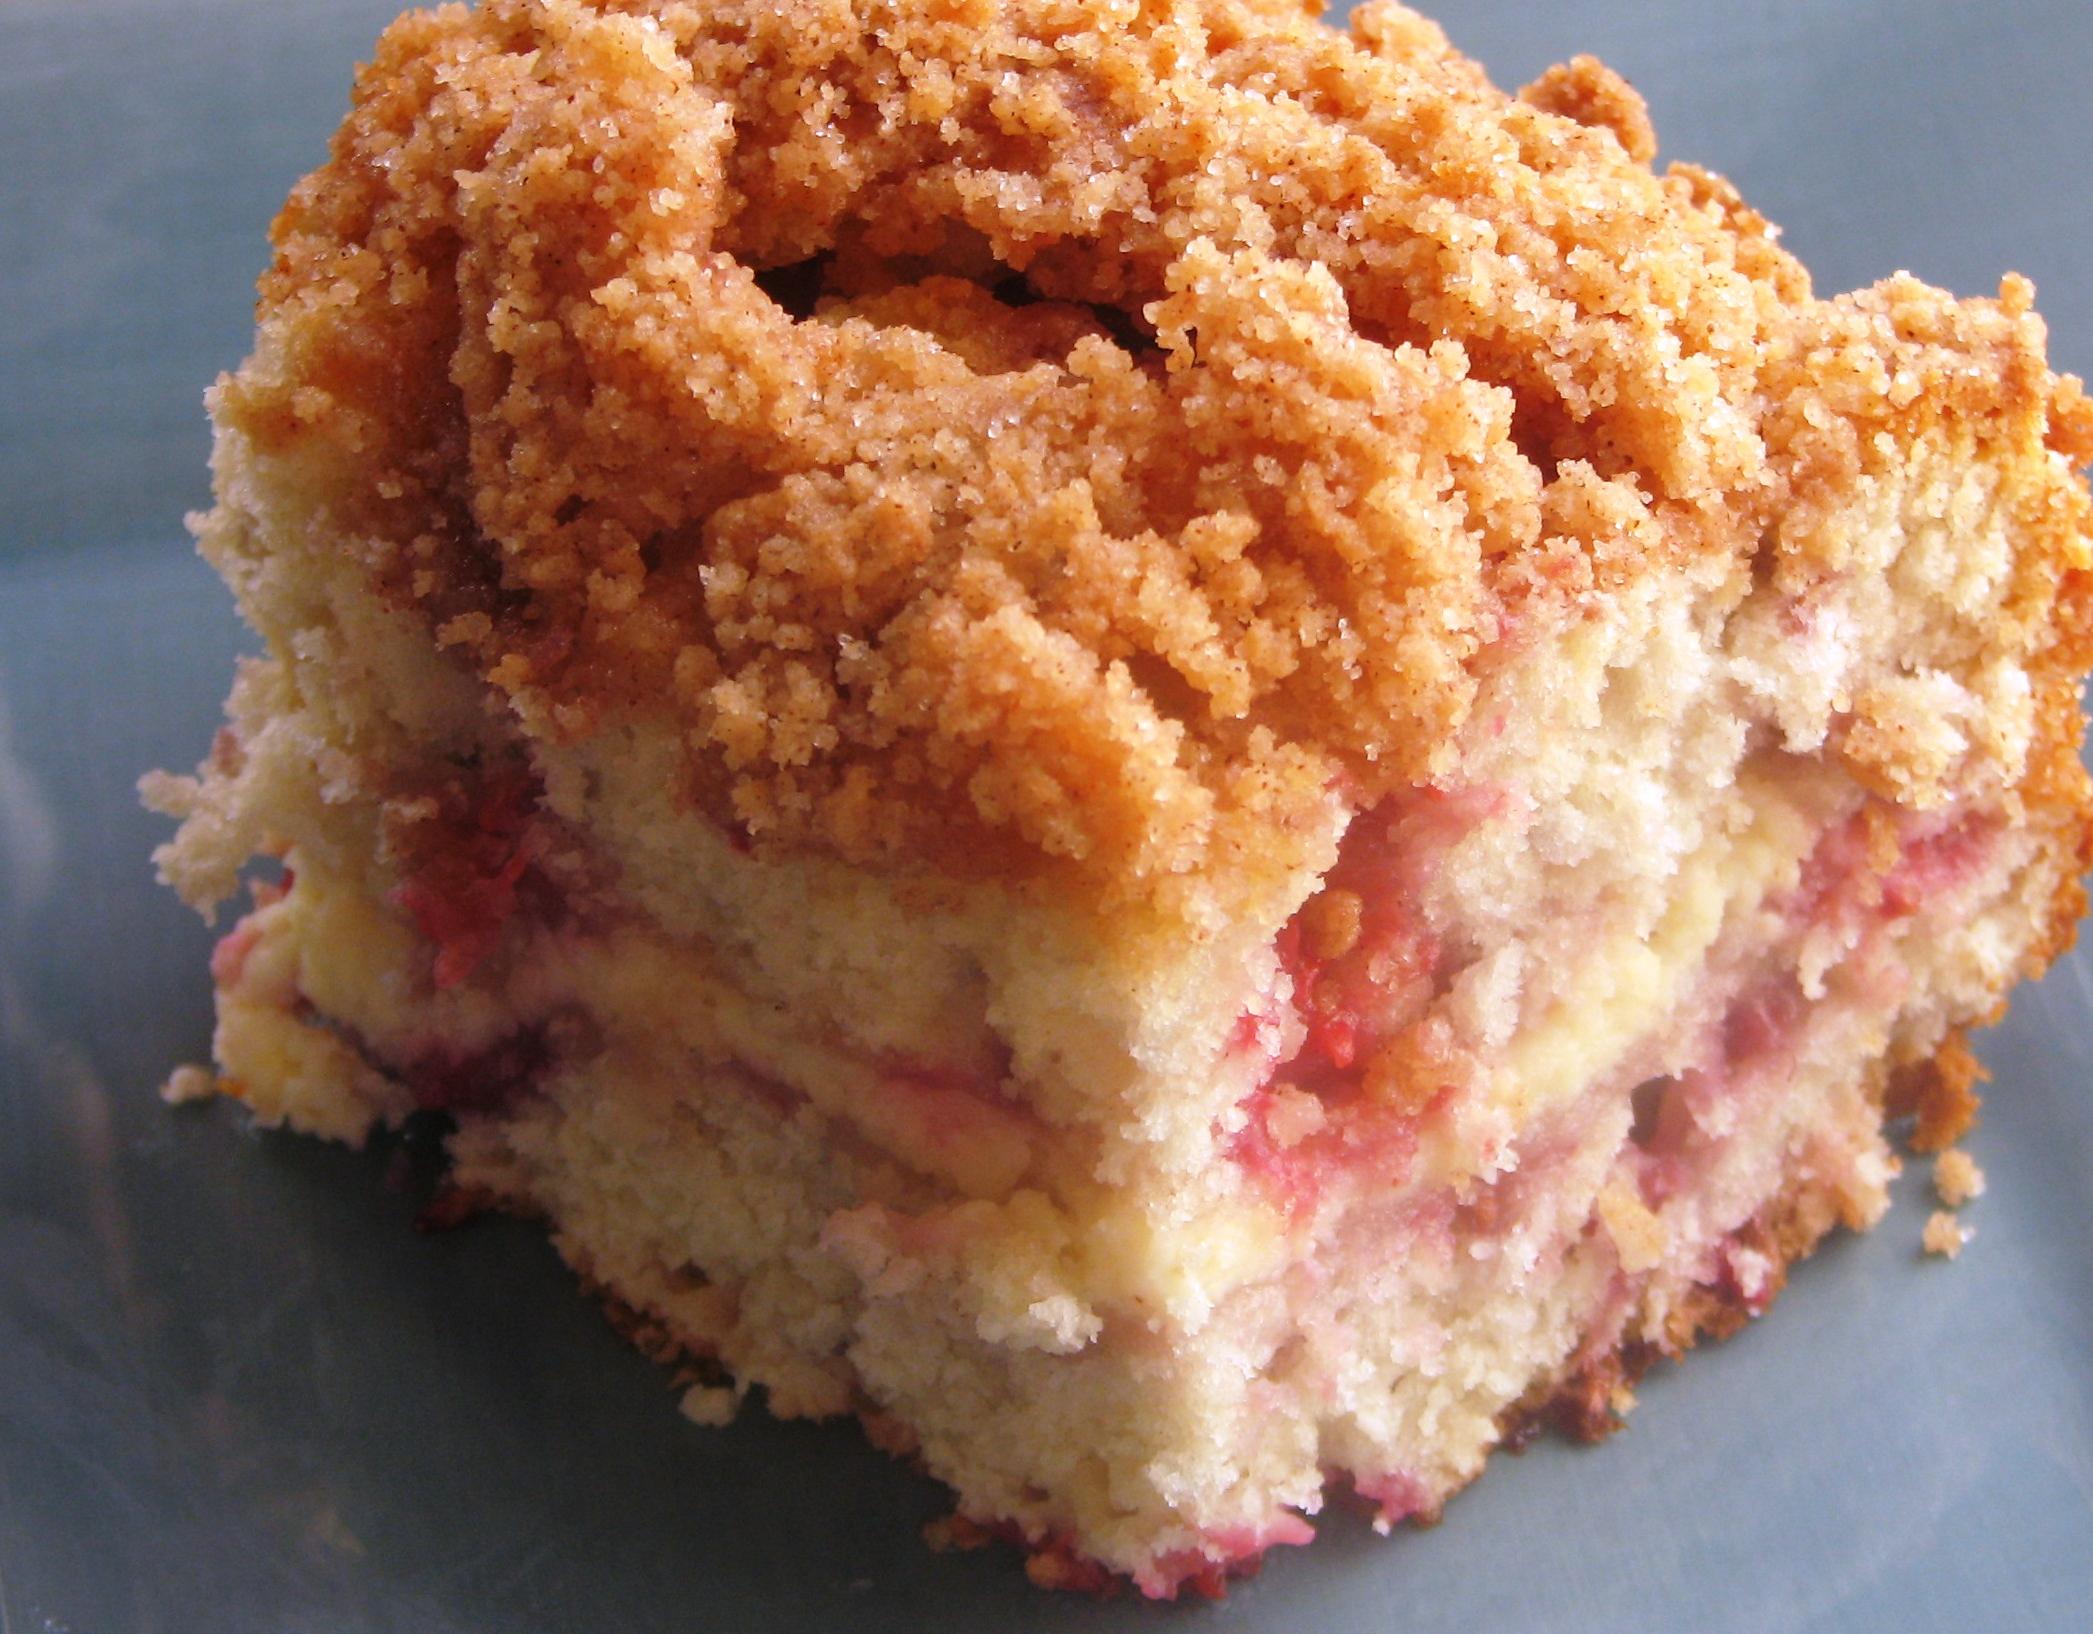  In every slice of this coffee cake, you’ll get a heavenly mix of raspberry goodness and a creamy cheesecake-like filling.